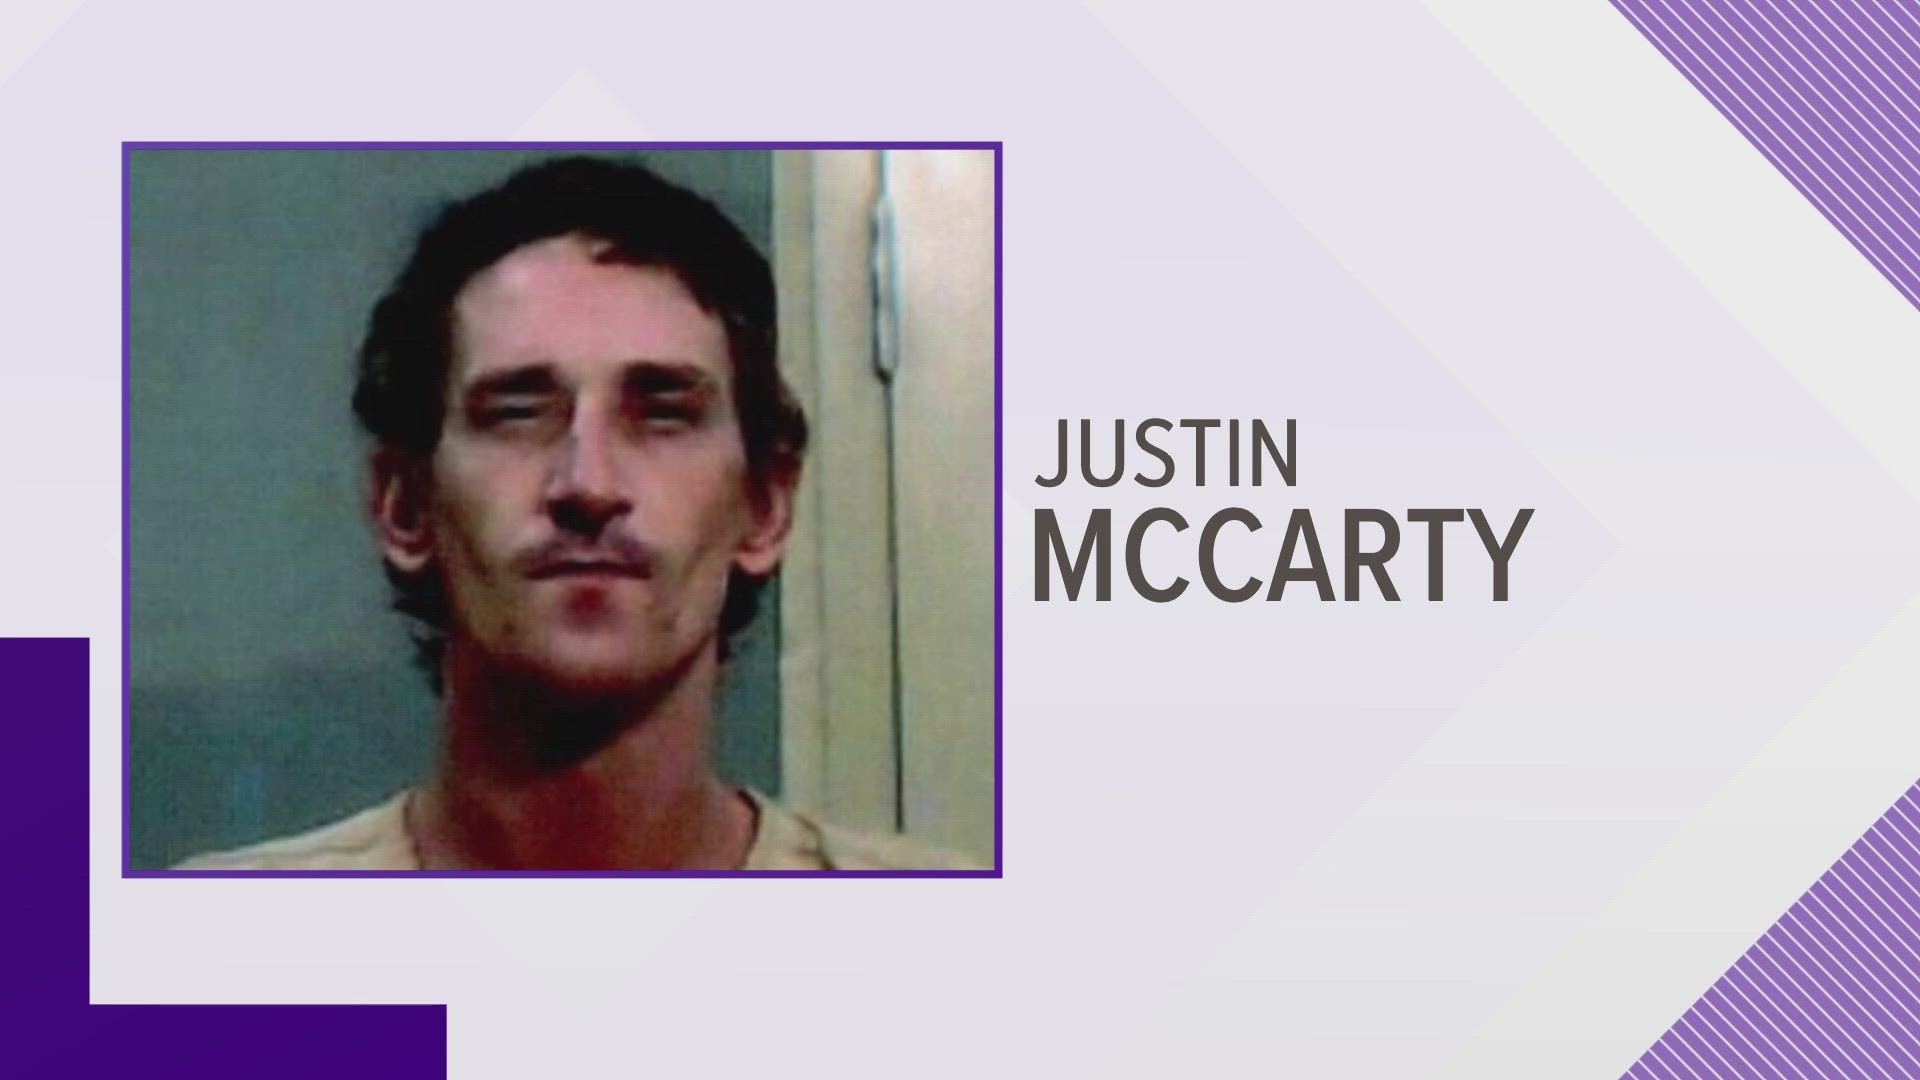 Justin McCarty has been charged with Aggravated Assault with a Deadly Weapon Causing Serious Bodily Injury.